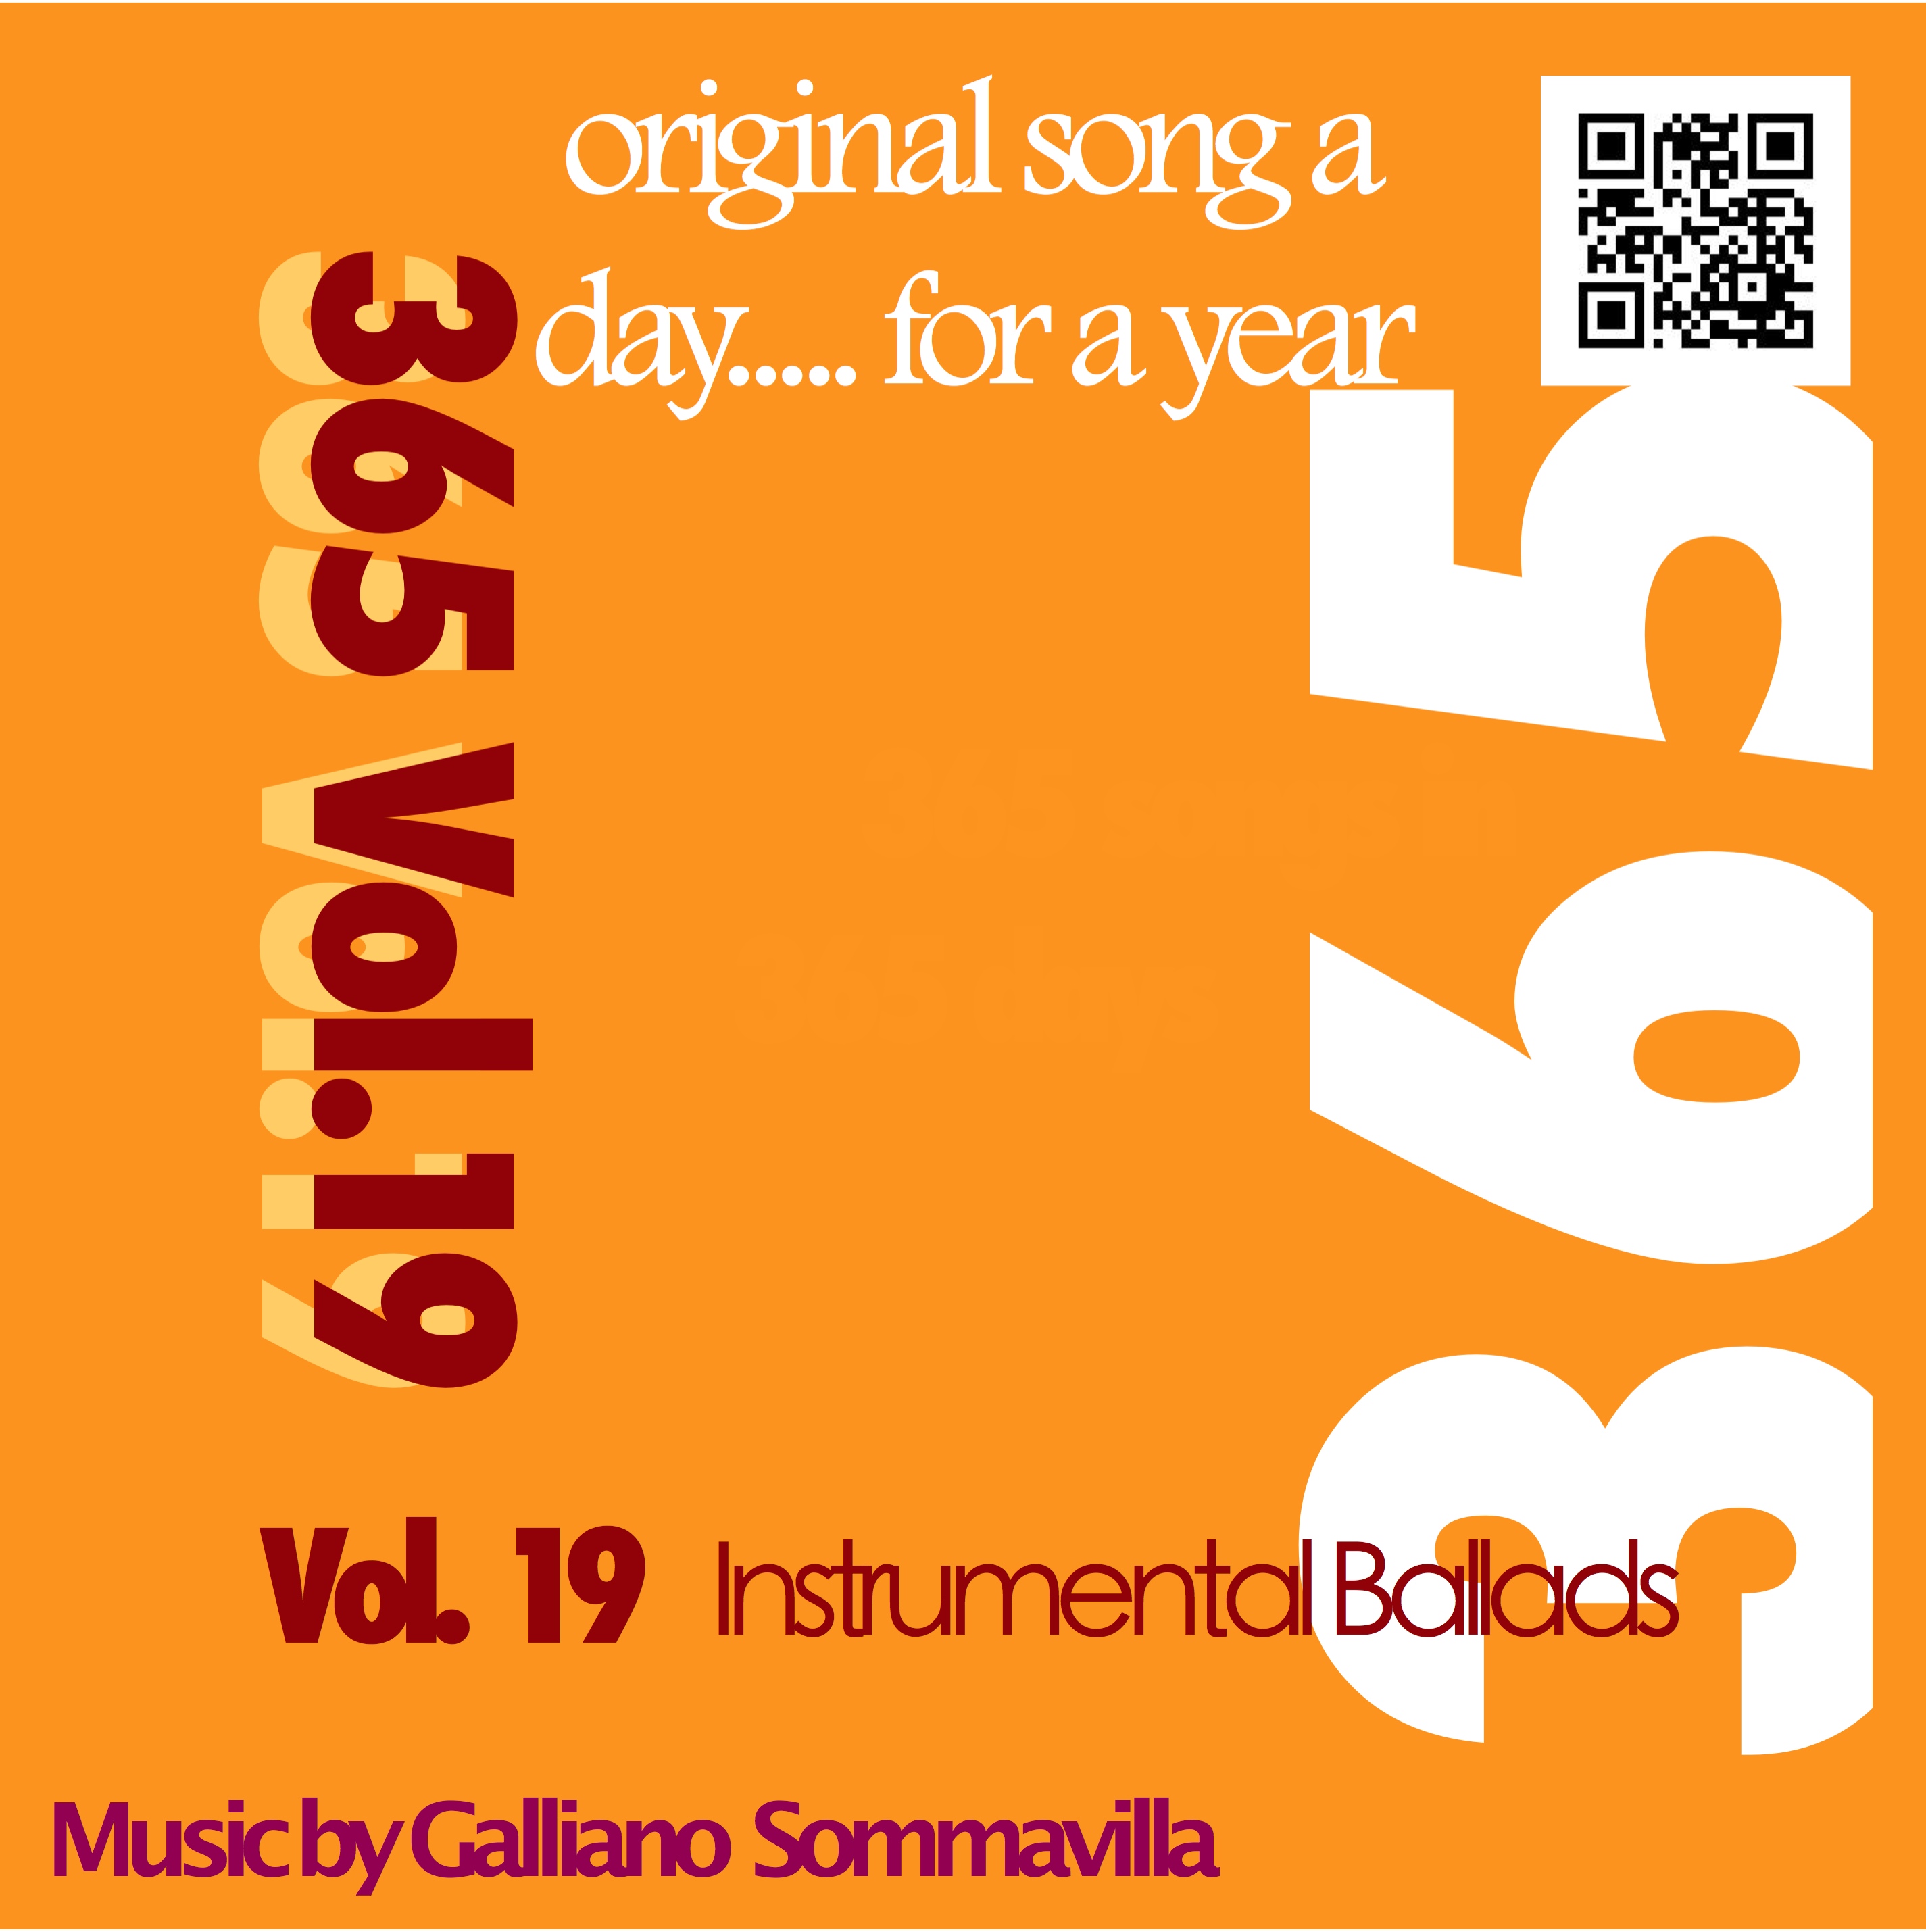 song a day for a year - series '365'